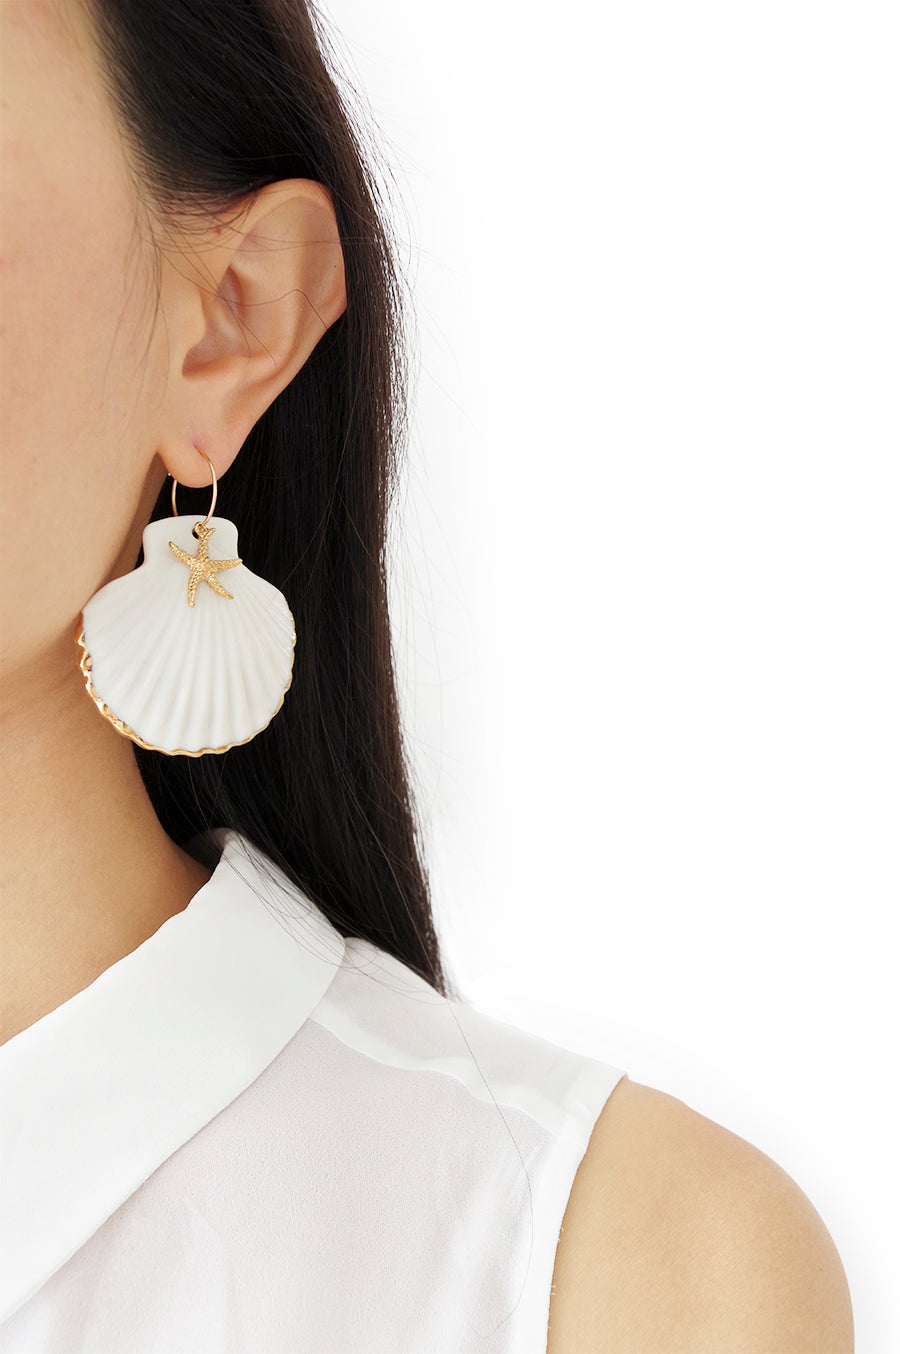 Golden Edge Clam Shell With Starfish Hoop Earrings